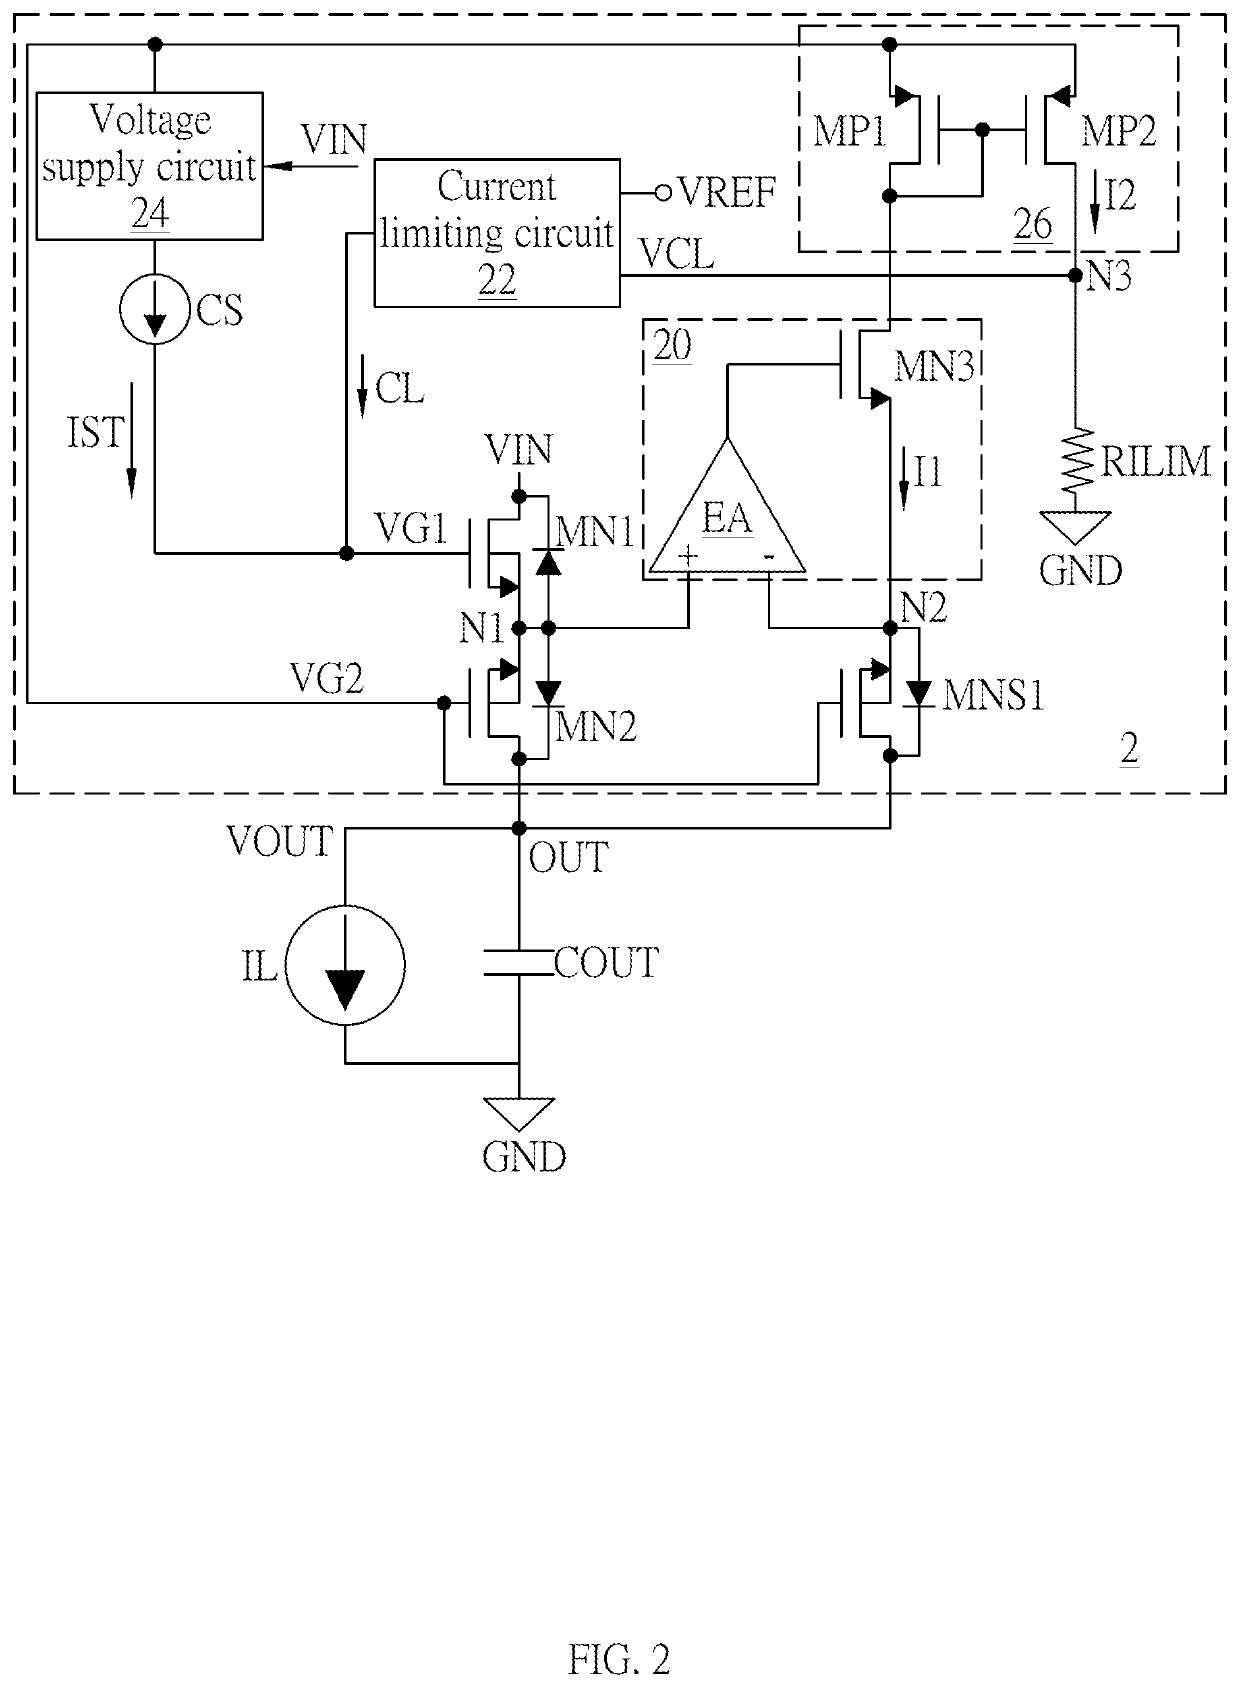 Power switch circuit with current sensing